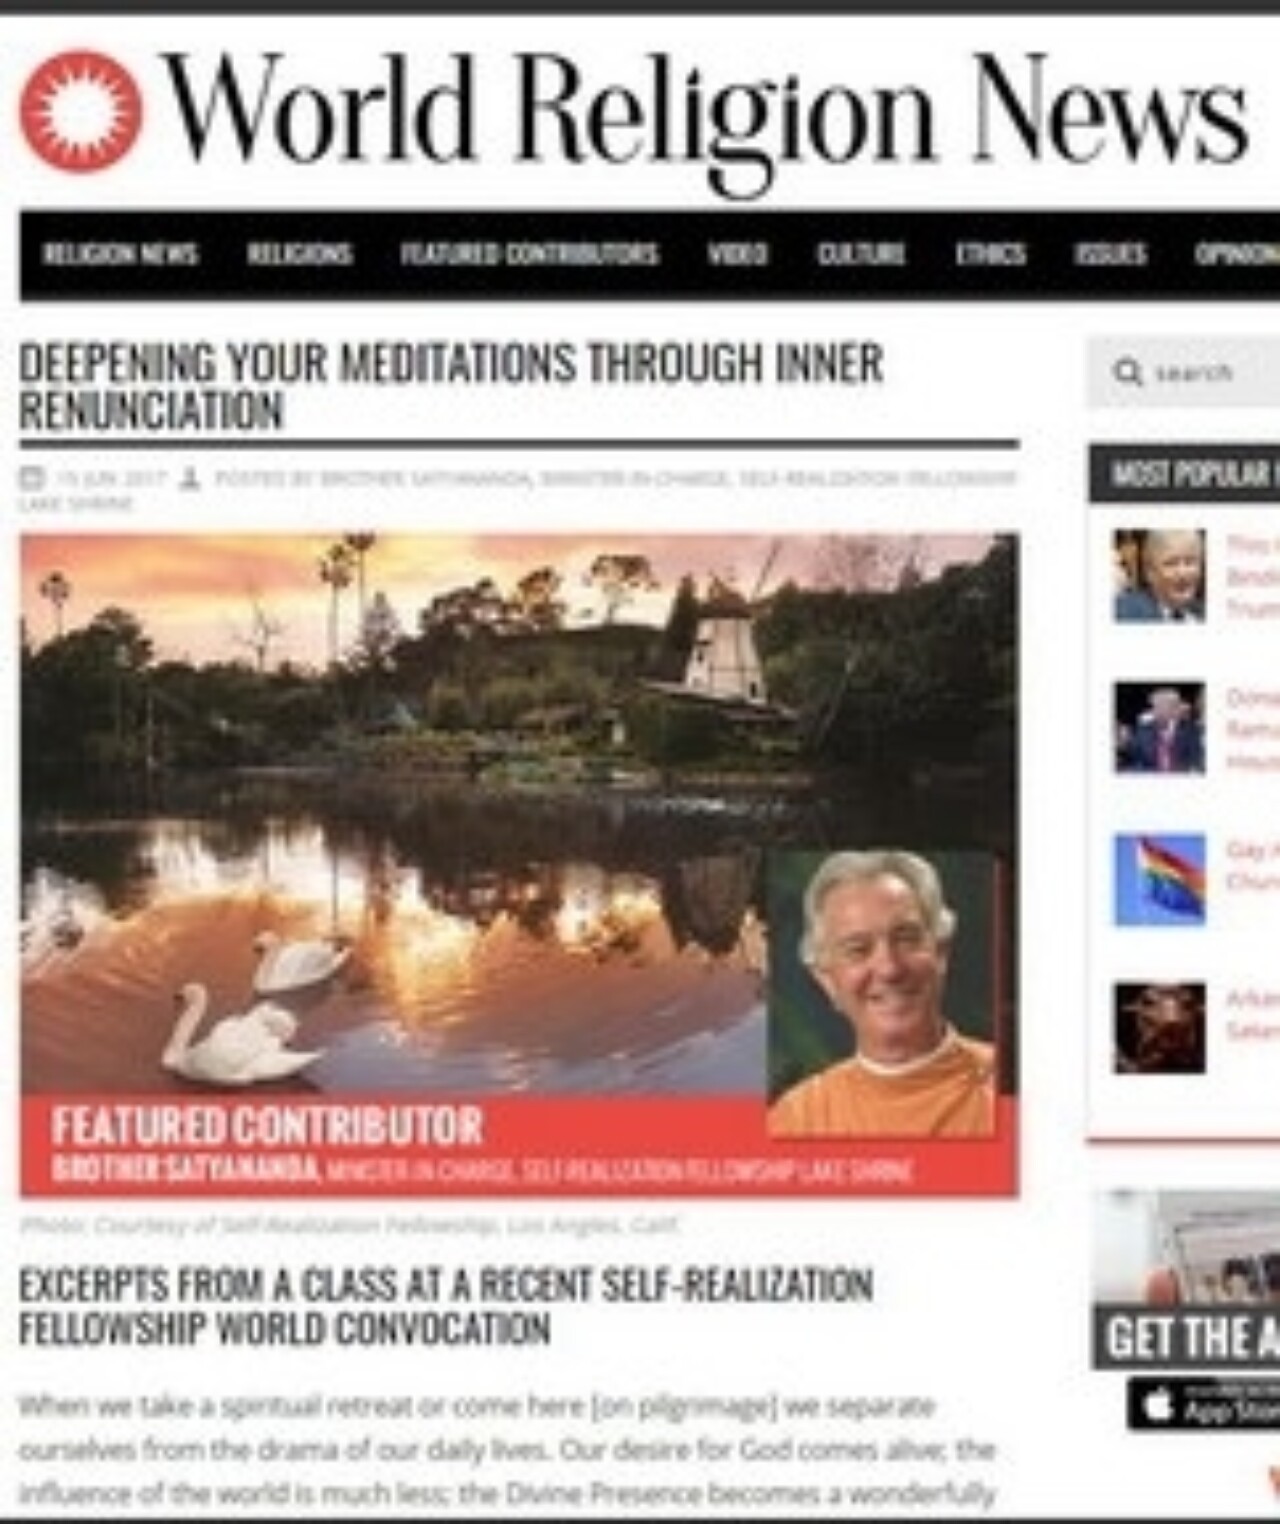 World Religion News features SRF World Convocation class presented by Brother Satyananda